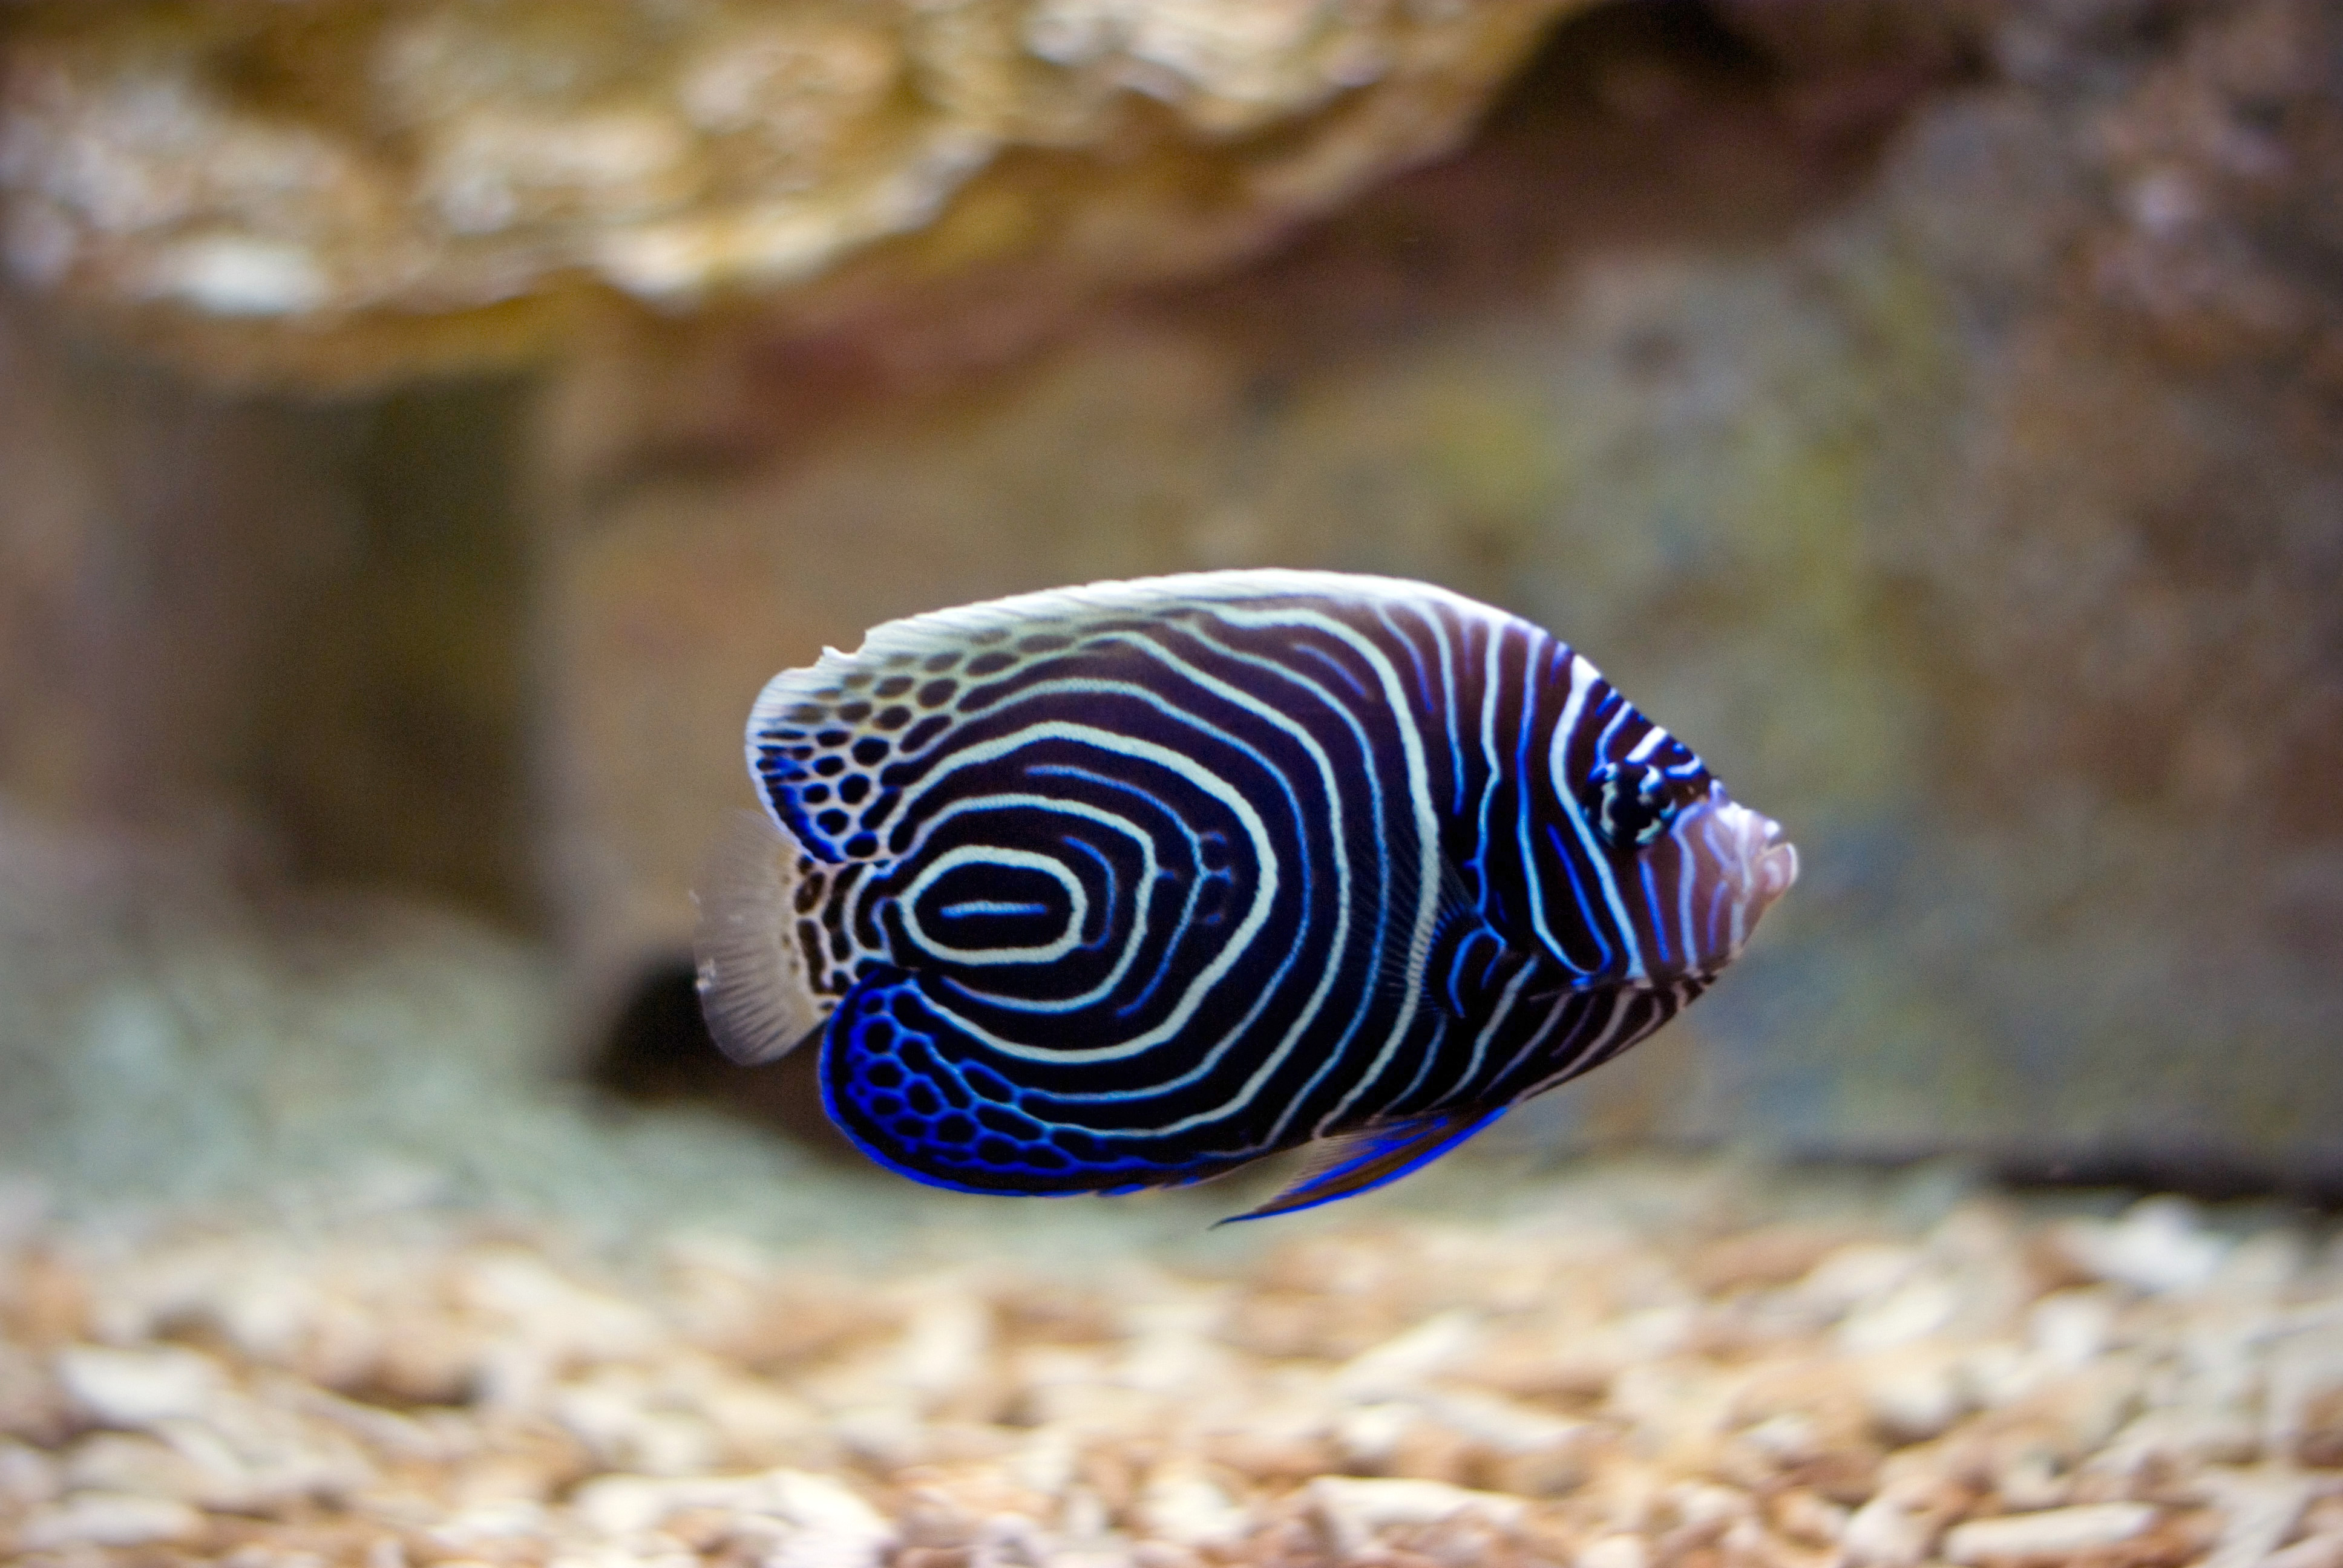 Cool And Colorful Fish Pictures